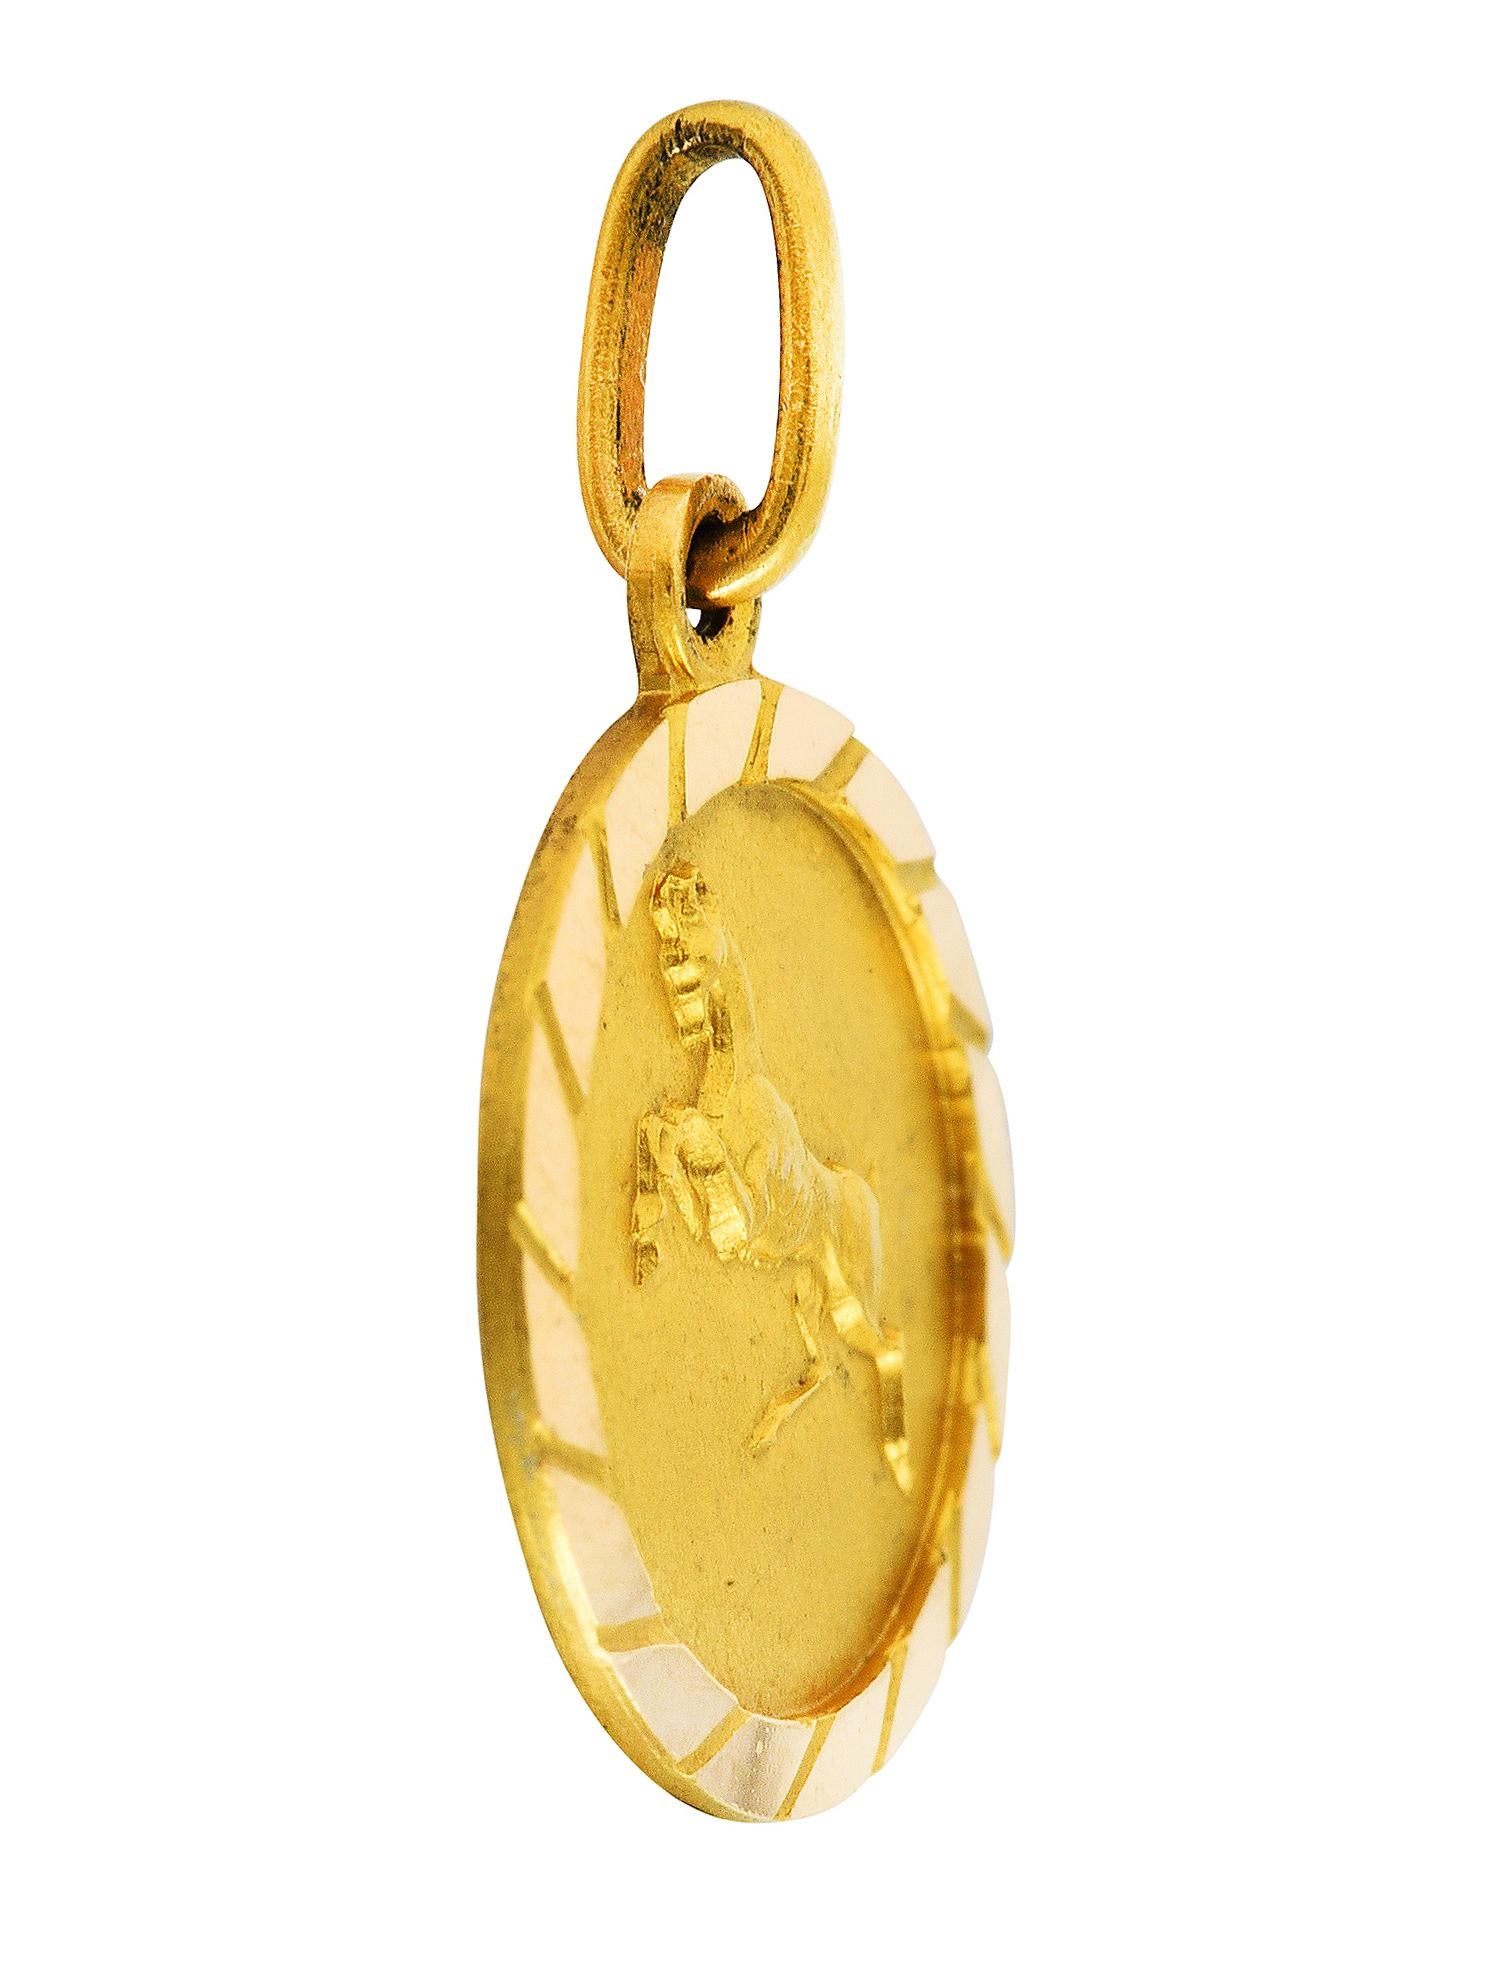 Circular charm has a matte finish and a raised rendering of Aries

Zodiac figure depicted as a stylized ram on its hind legs

Faceted high polish surround

Italian assay marks for 18 karat gold

Circa: 1970's

Measures: 1/2 x 3/4 inch (including